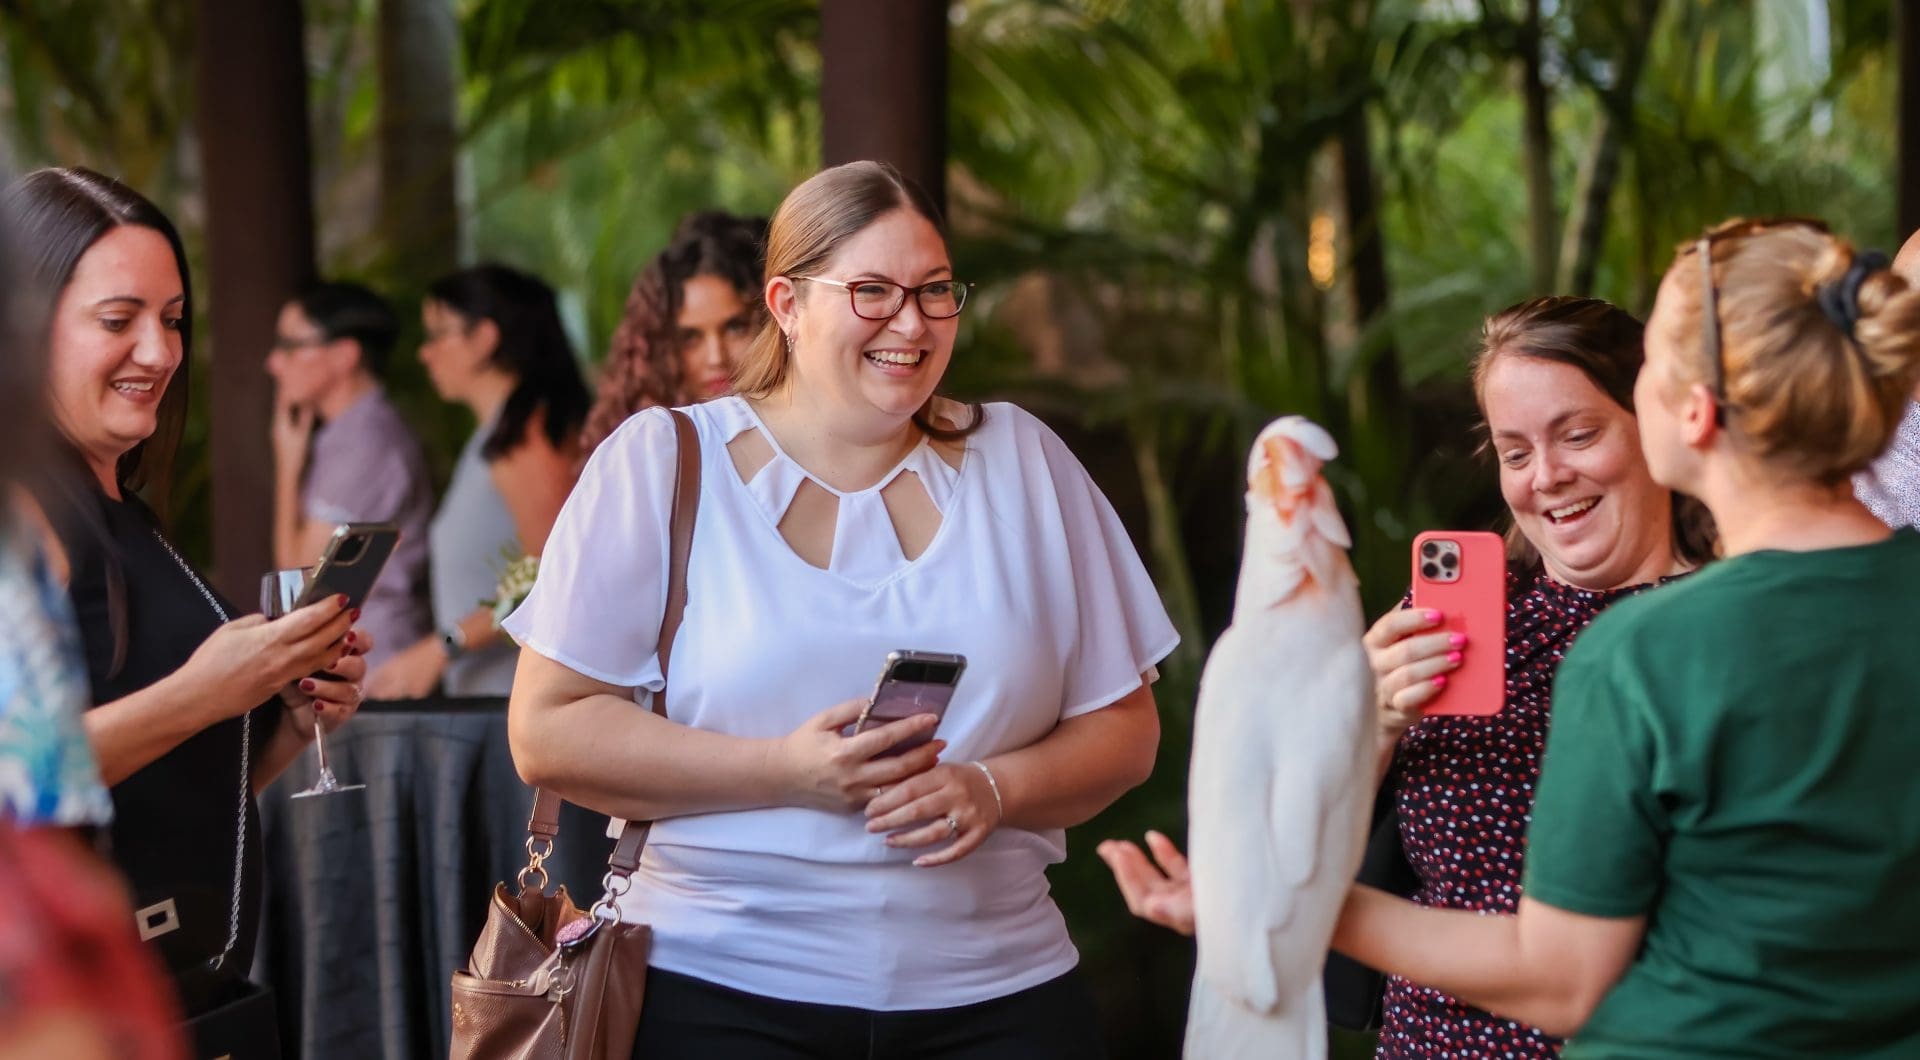 Three women are taking pictures with their cell phones of a white macaw during an event.